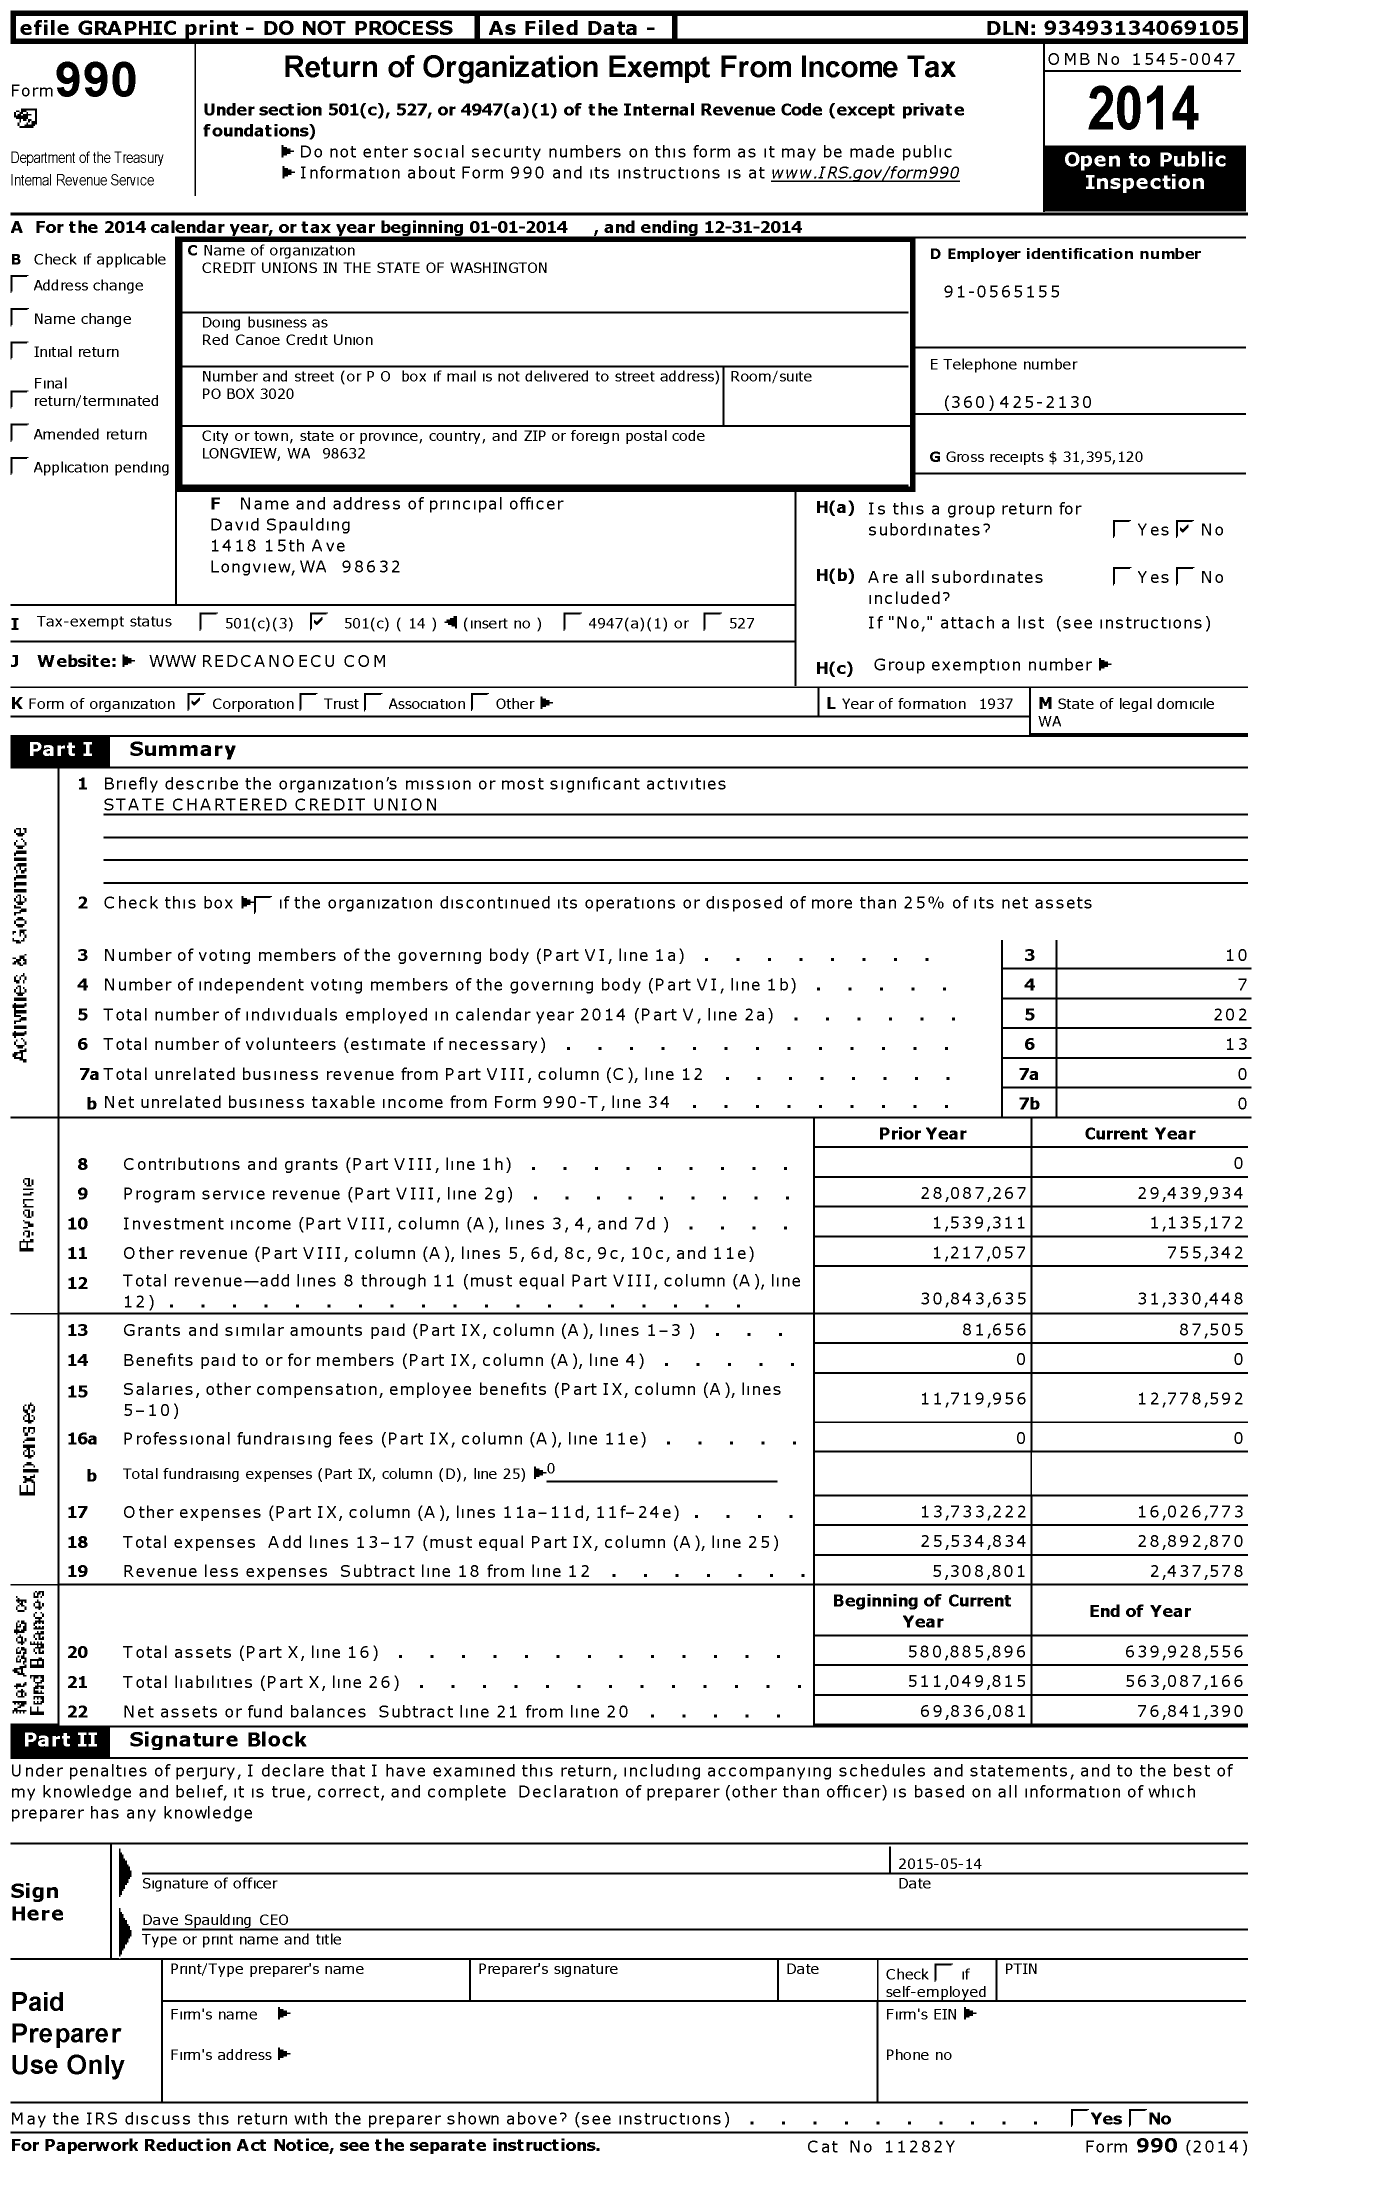 Image of first page of 2014 Form 990O for Red Canoe Credit Union / Credit Unions in the State of Washington